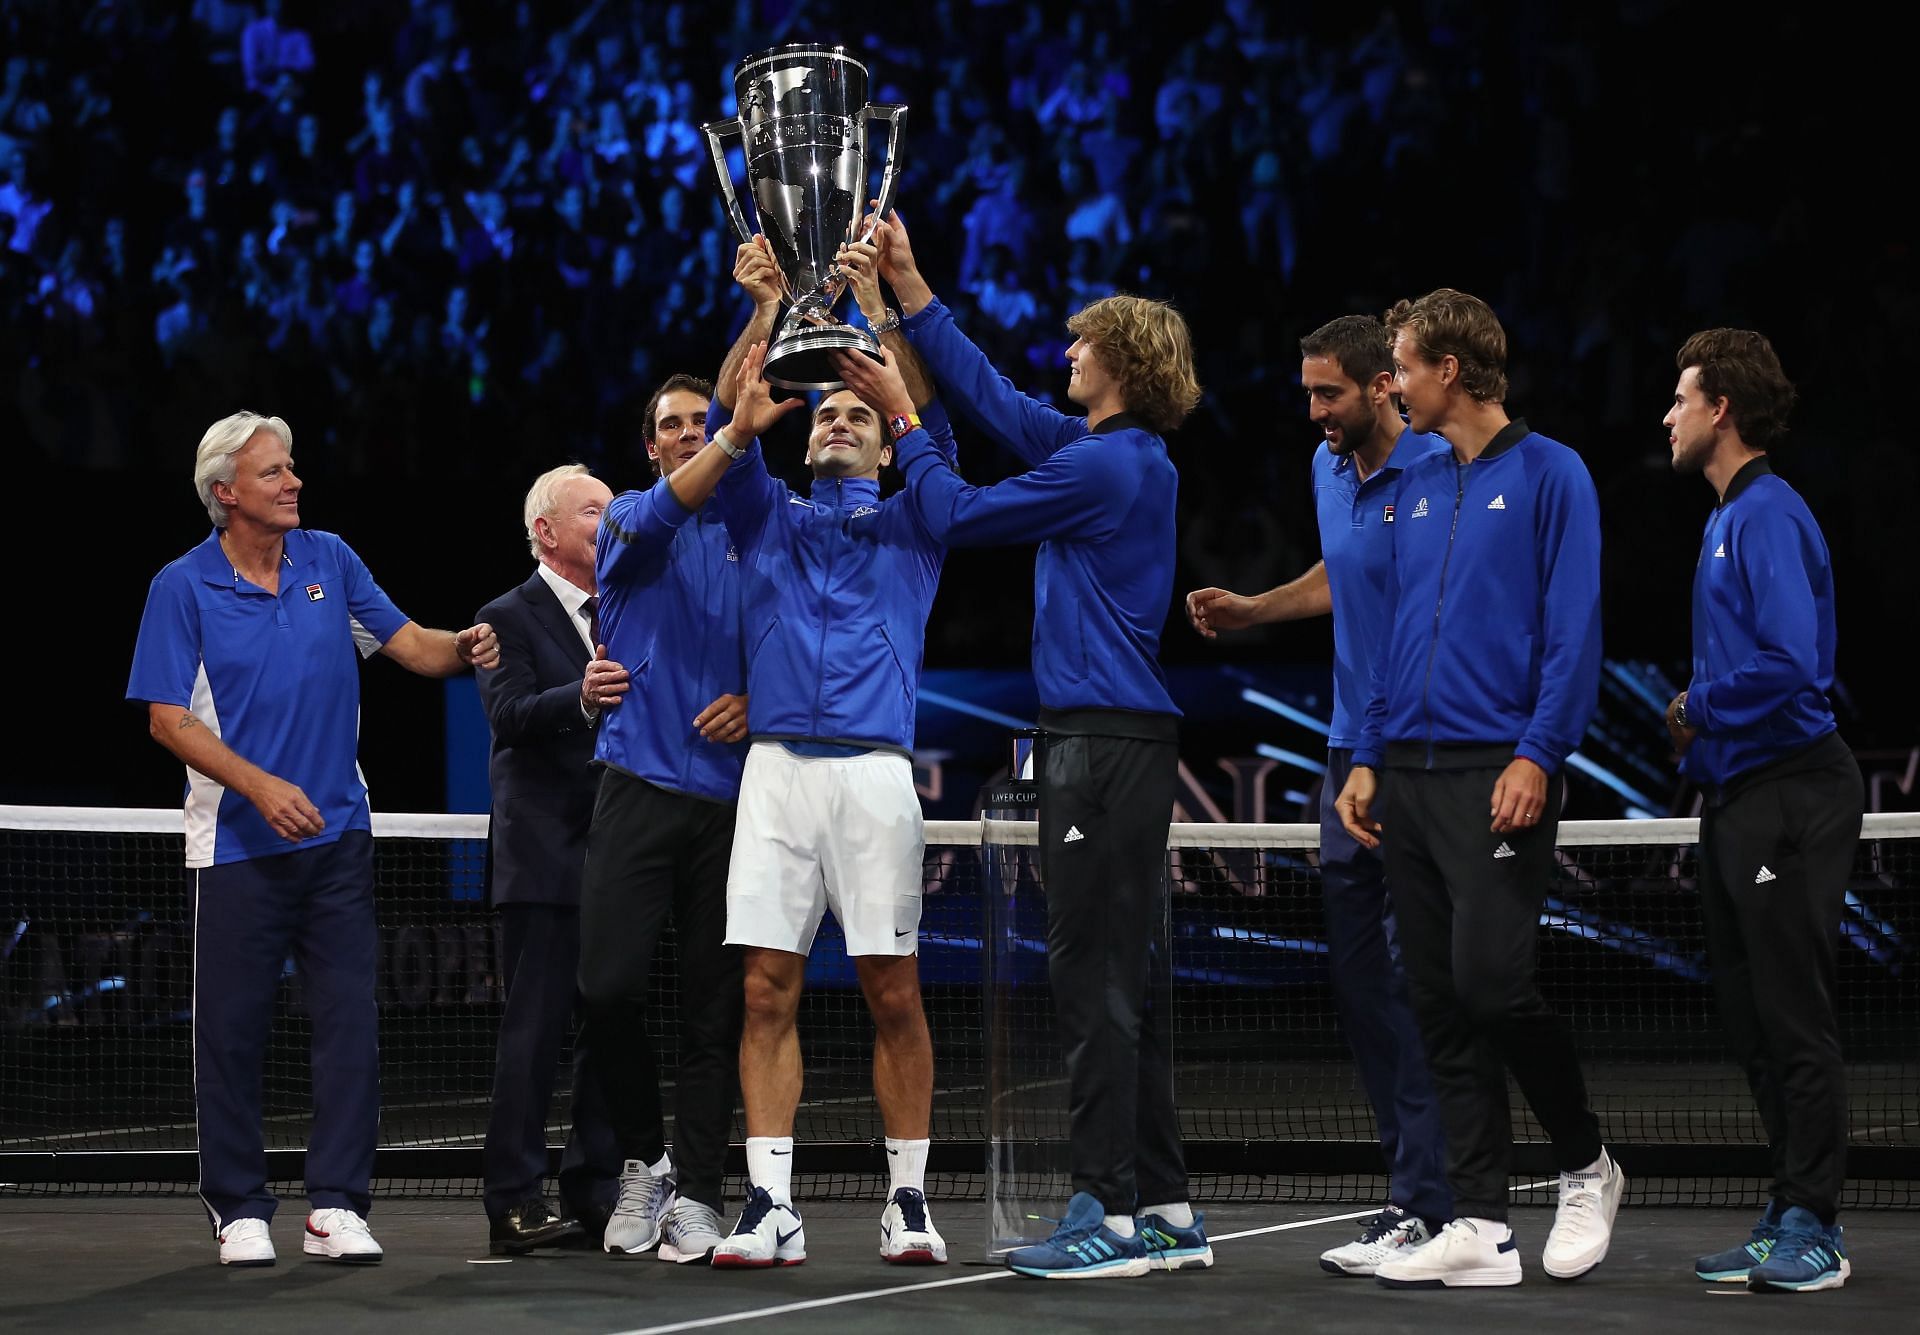 Team Europe hold aloft the Laver Cup at the inaugural edition in 2017